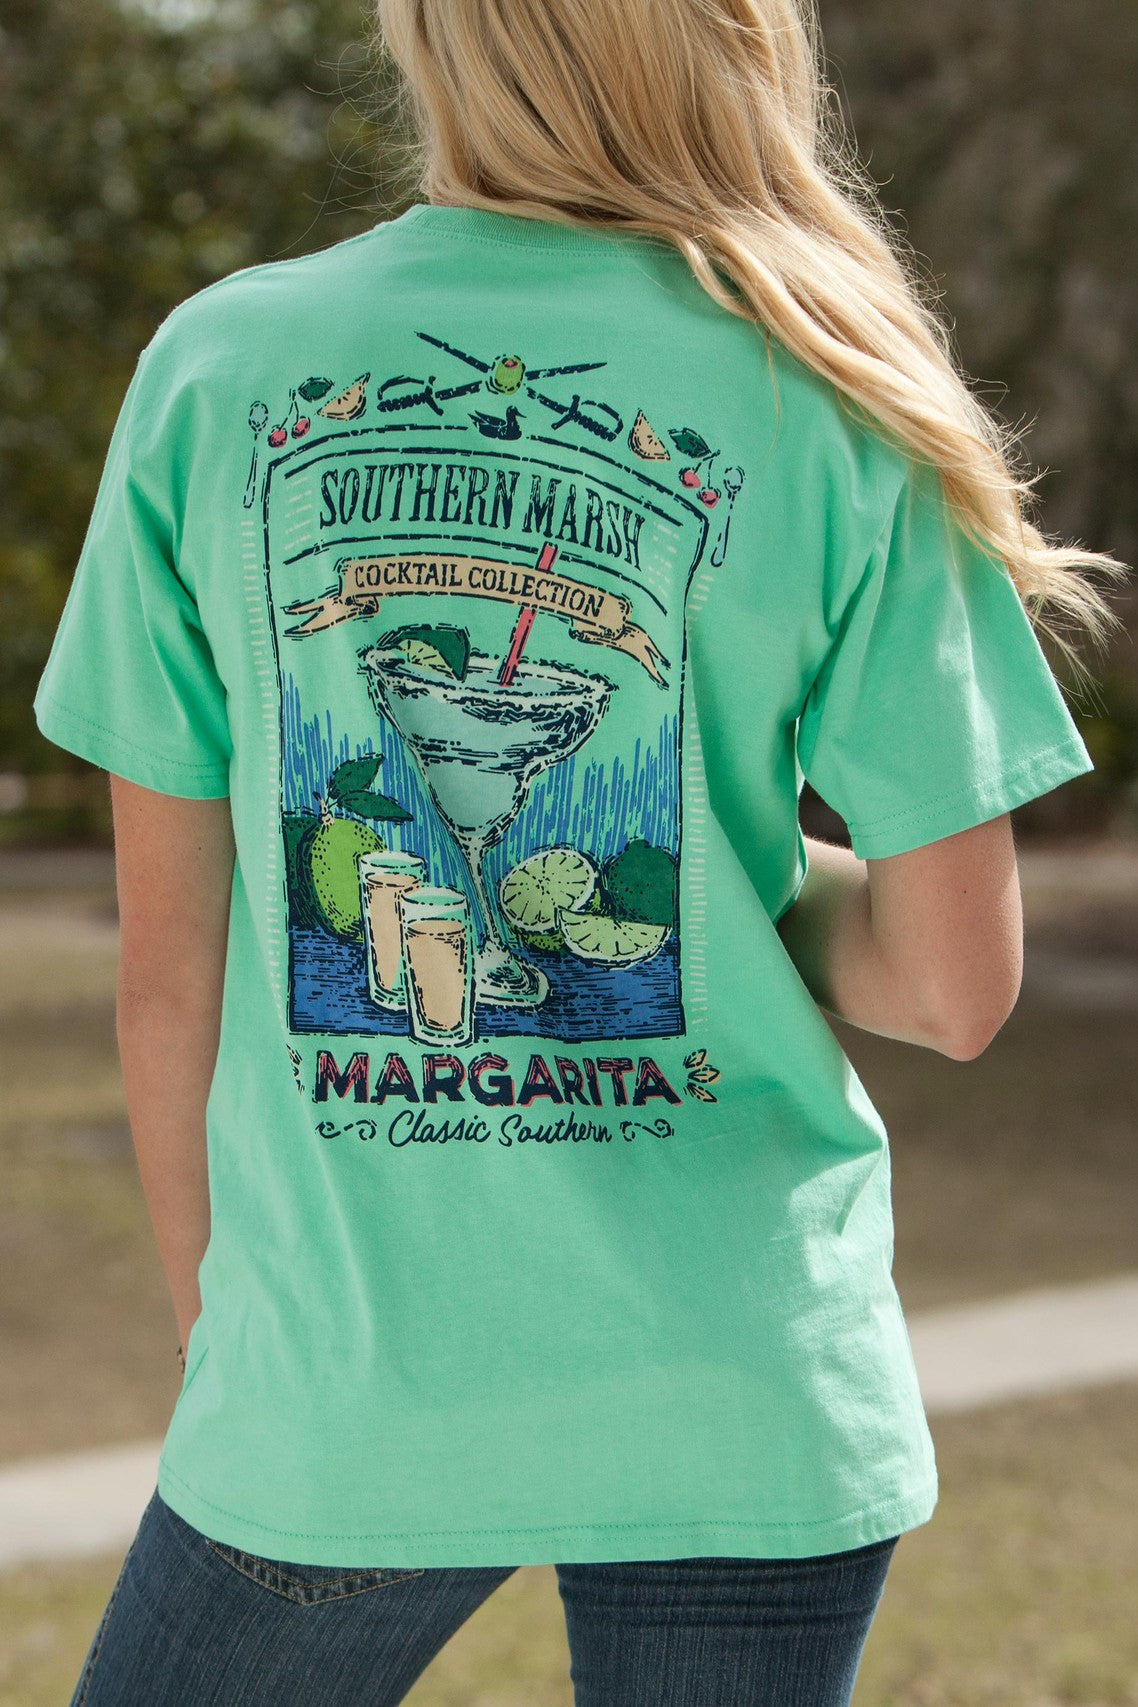 Southern Marsh: Cocktail Collection - Margarita